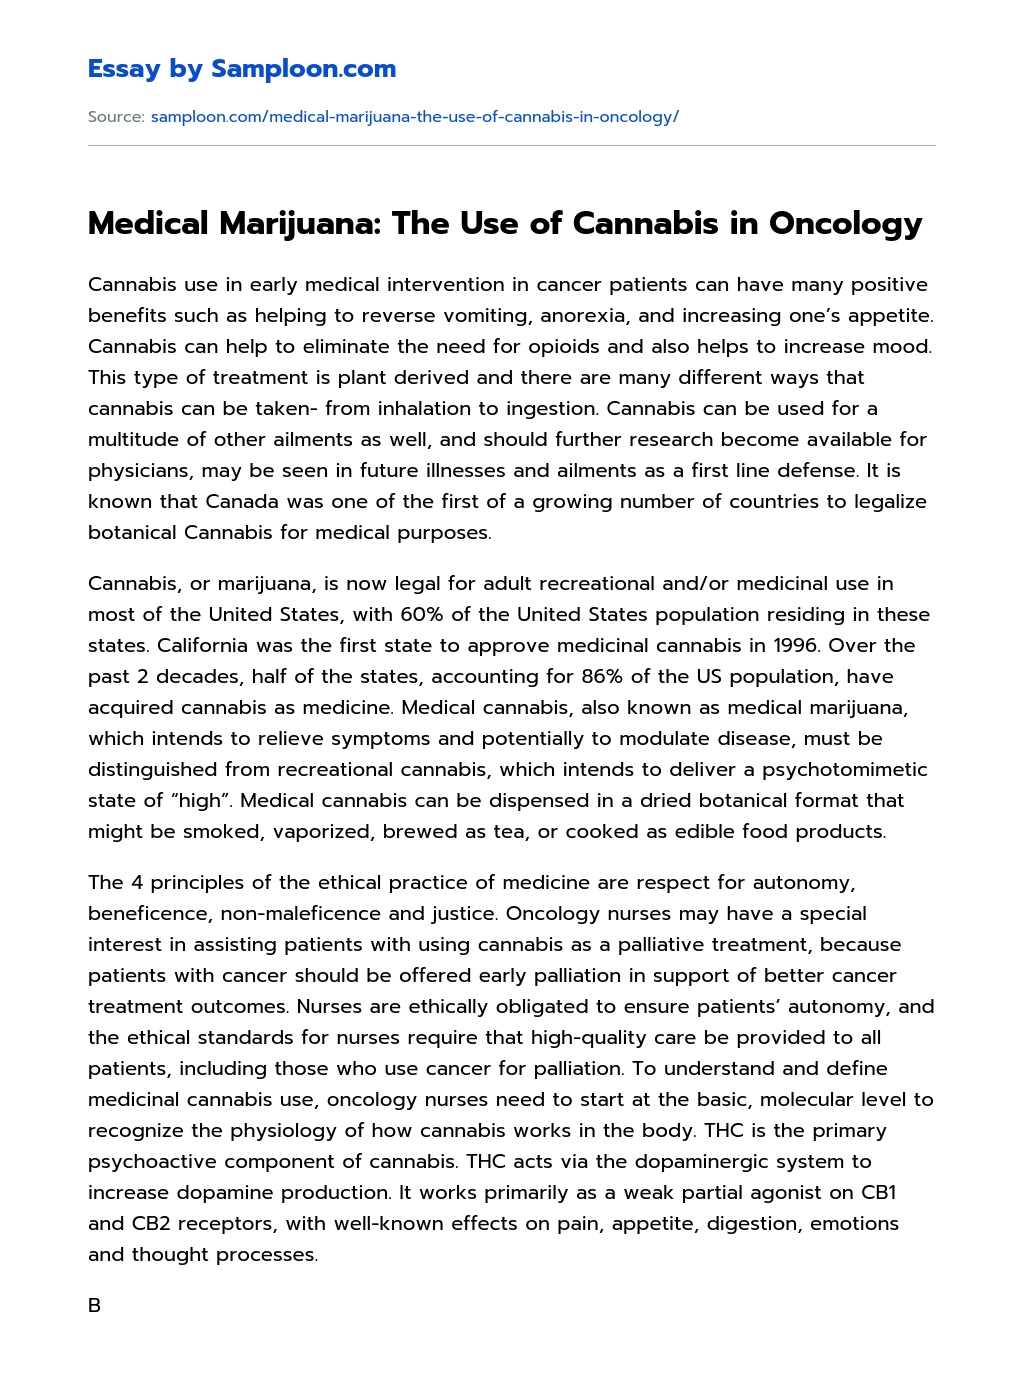 Medical Marijuana: The Use of Cannabis in Oncology essay